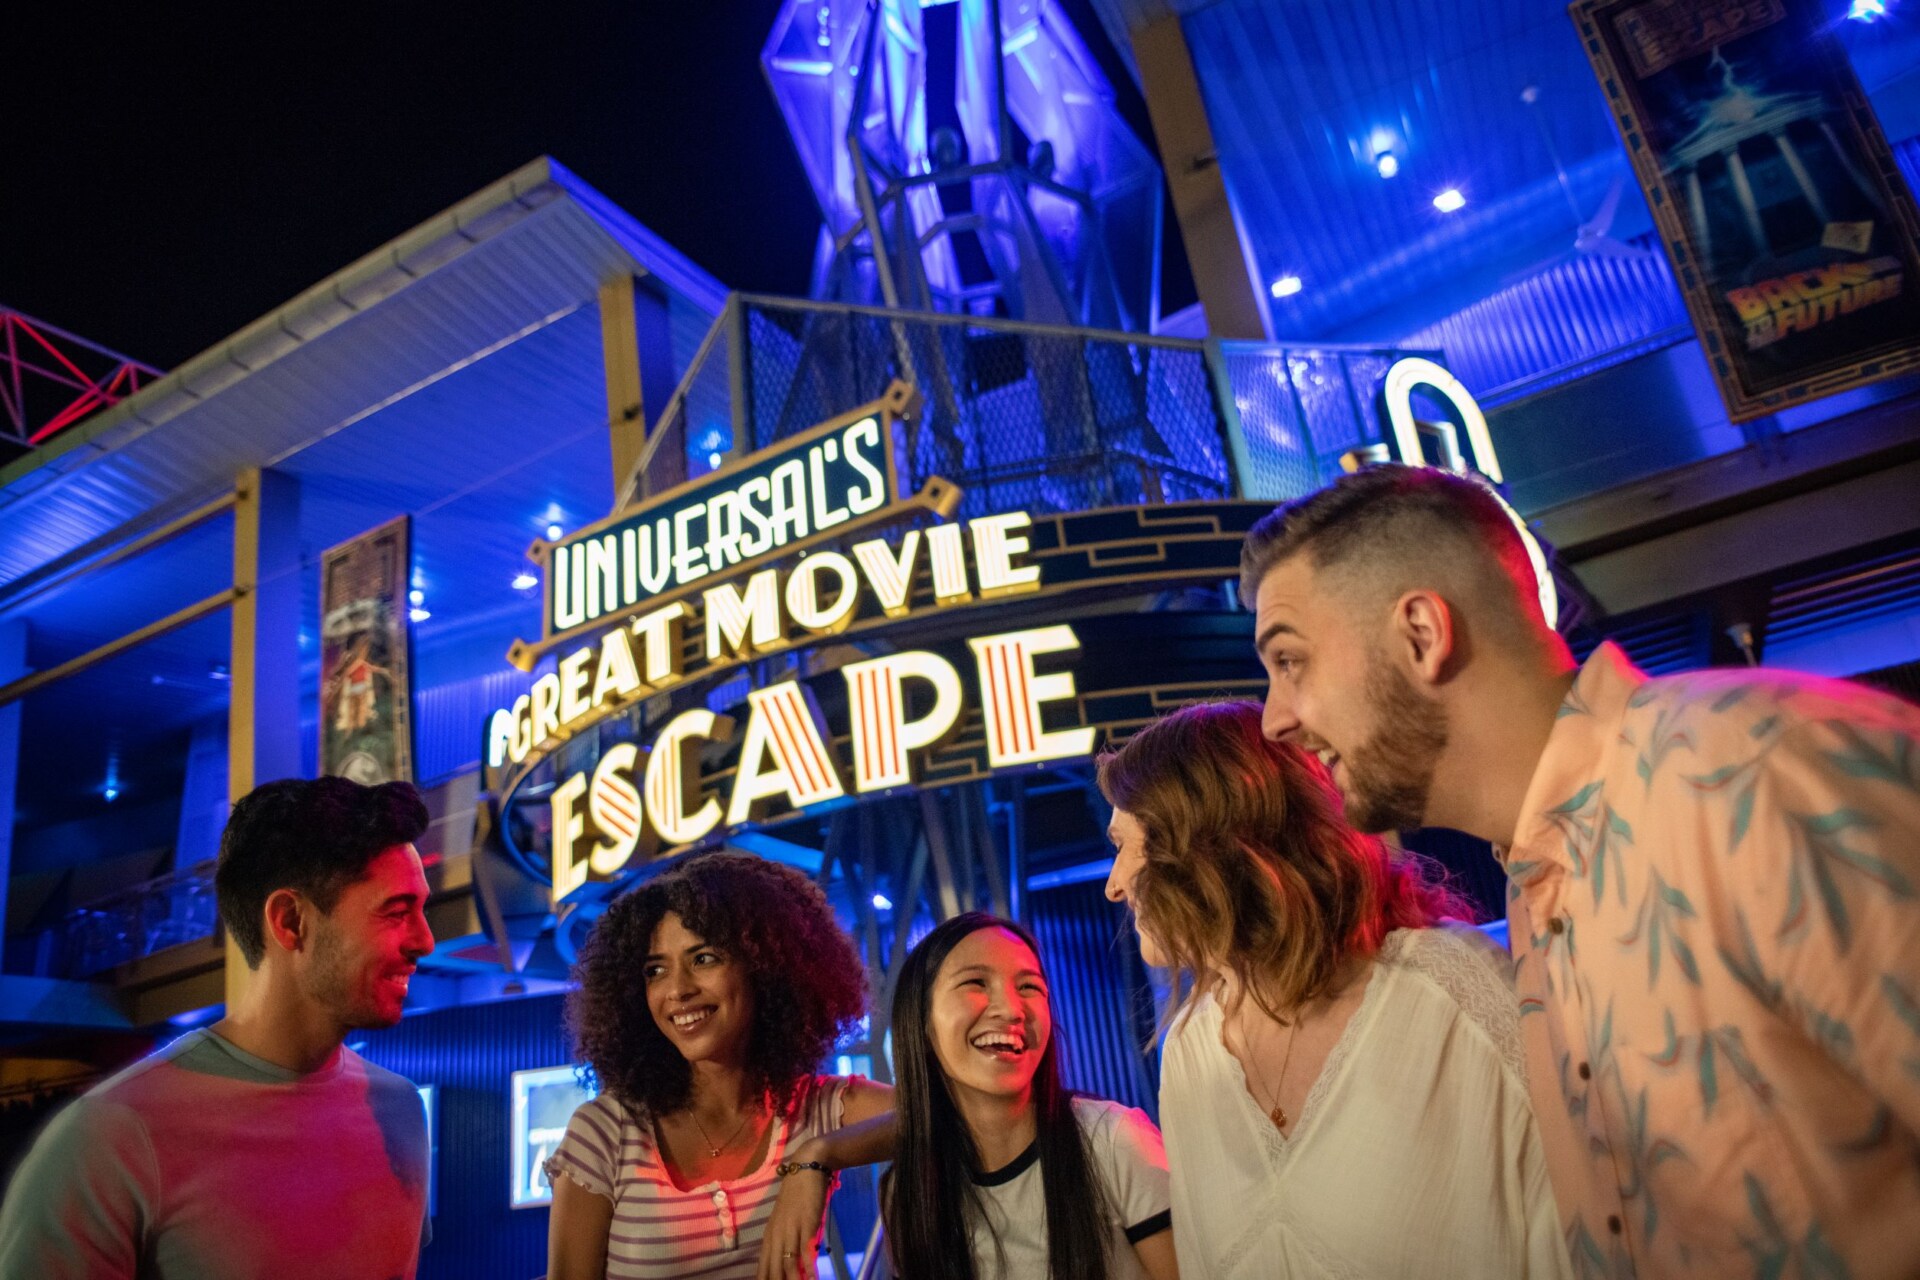 Universal Orlando’s First-Ever Escape Room Experience Opens – Universal’s Great Movie Escape